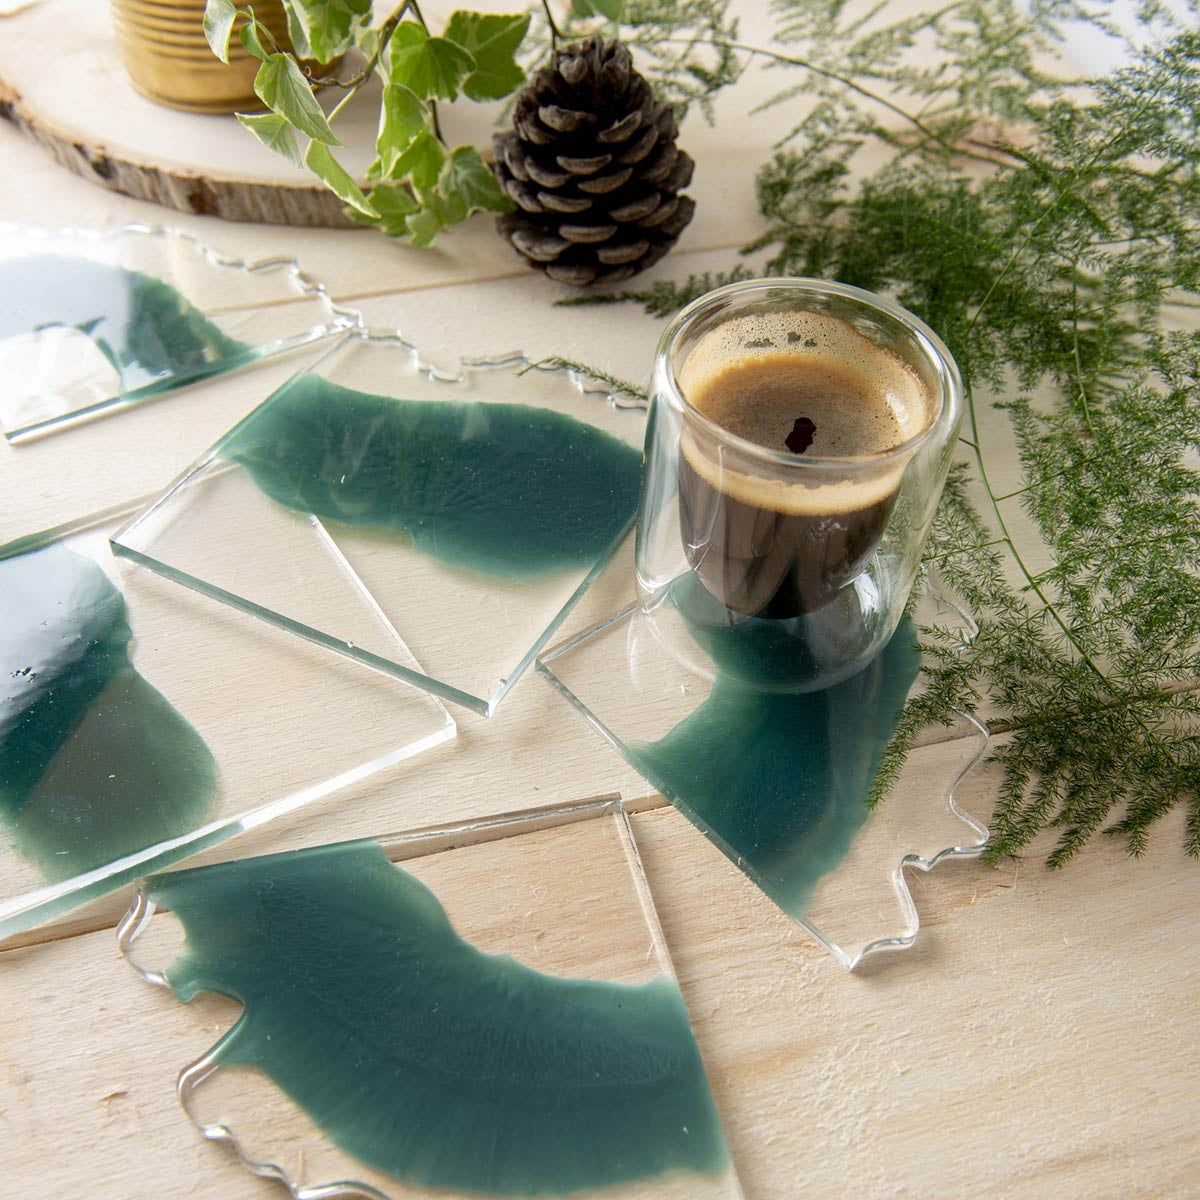 Pebeo - Gedeo - Silicone Mould Geode Puzzle Tray